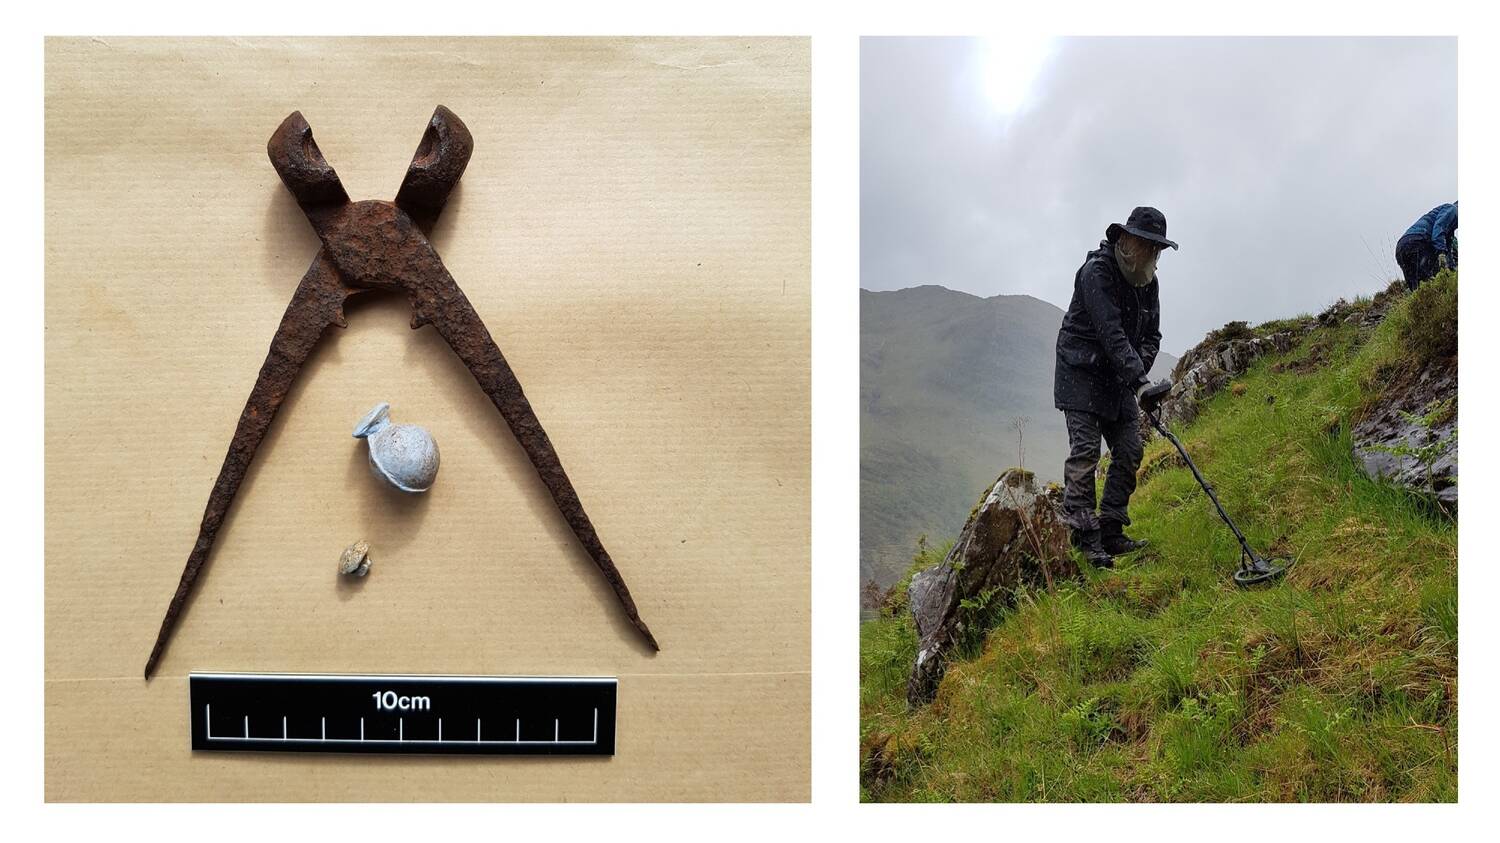 Two images side by side. The image on the left shows a scissors-like implement with a scale below it; the image on the right shows people metal detecting on a hillside.